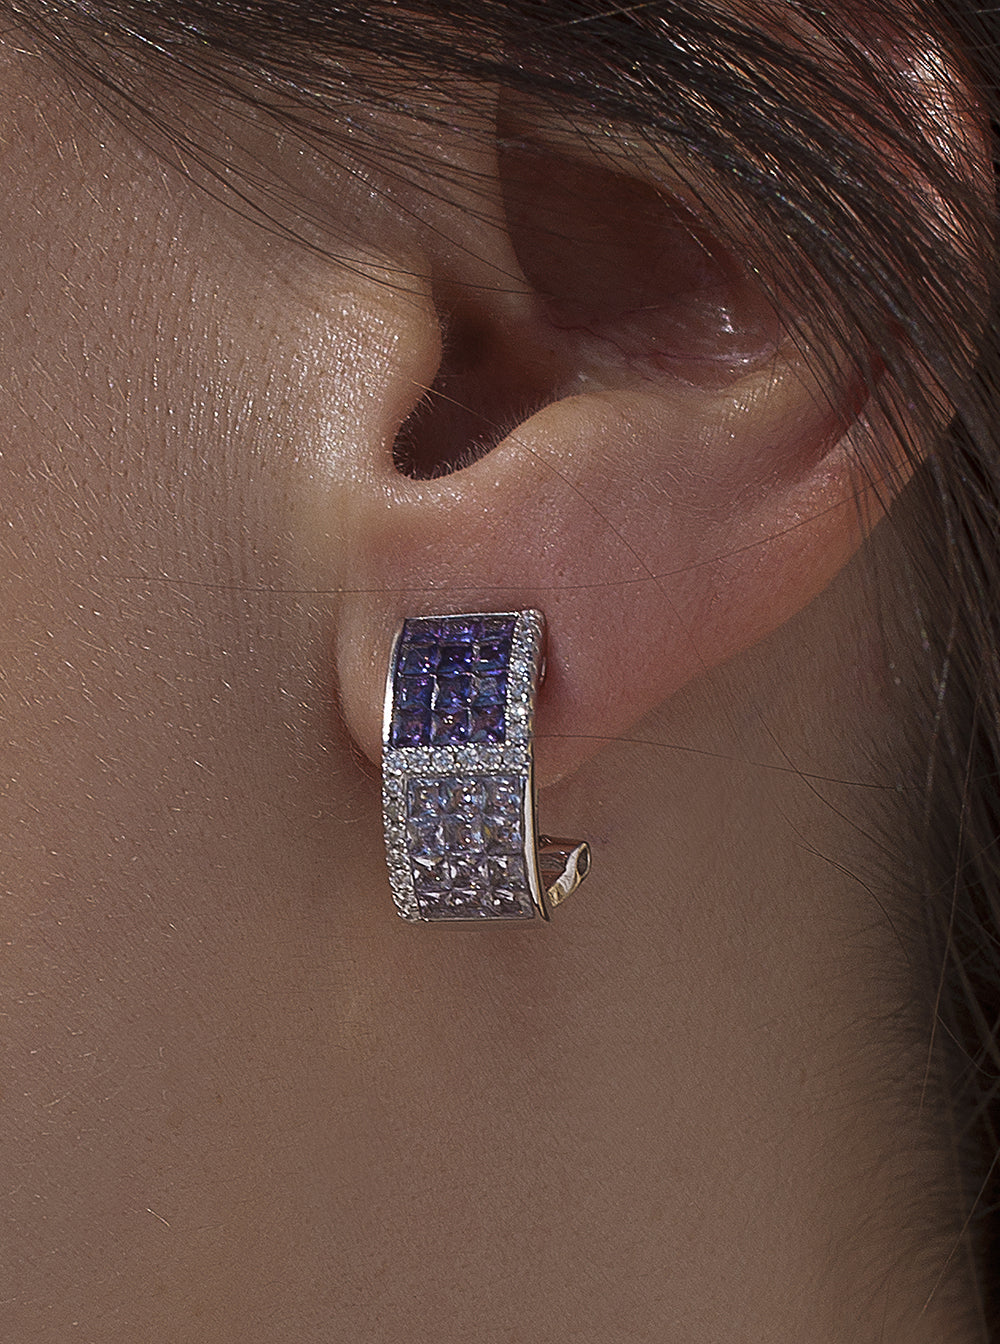 Earrings with omega clasp triple rail clasp in violet tones